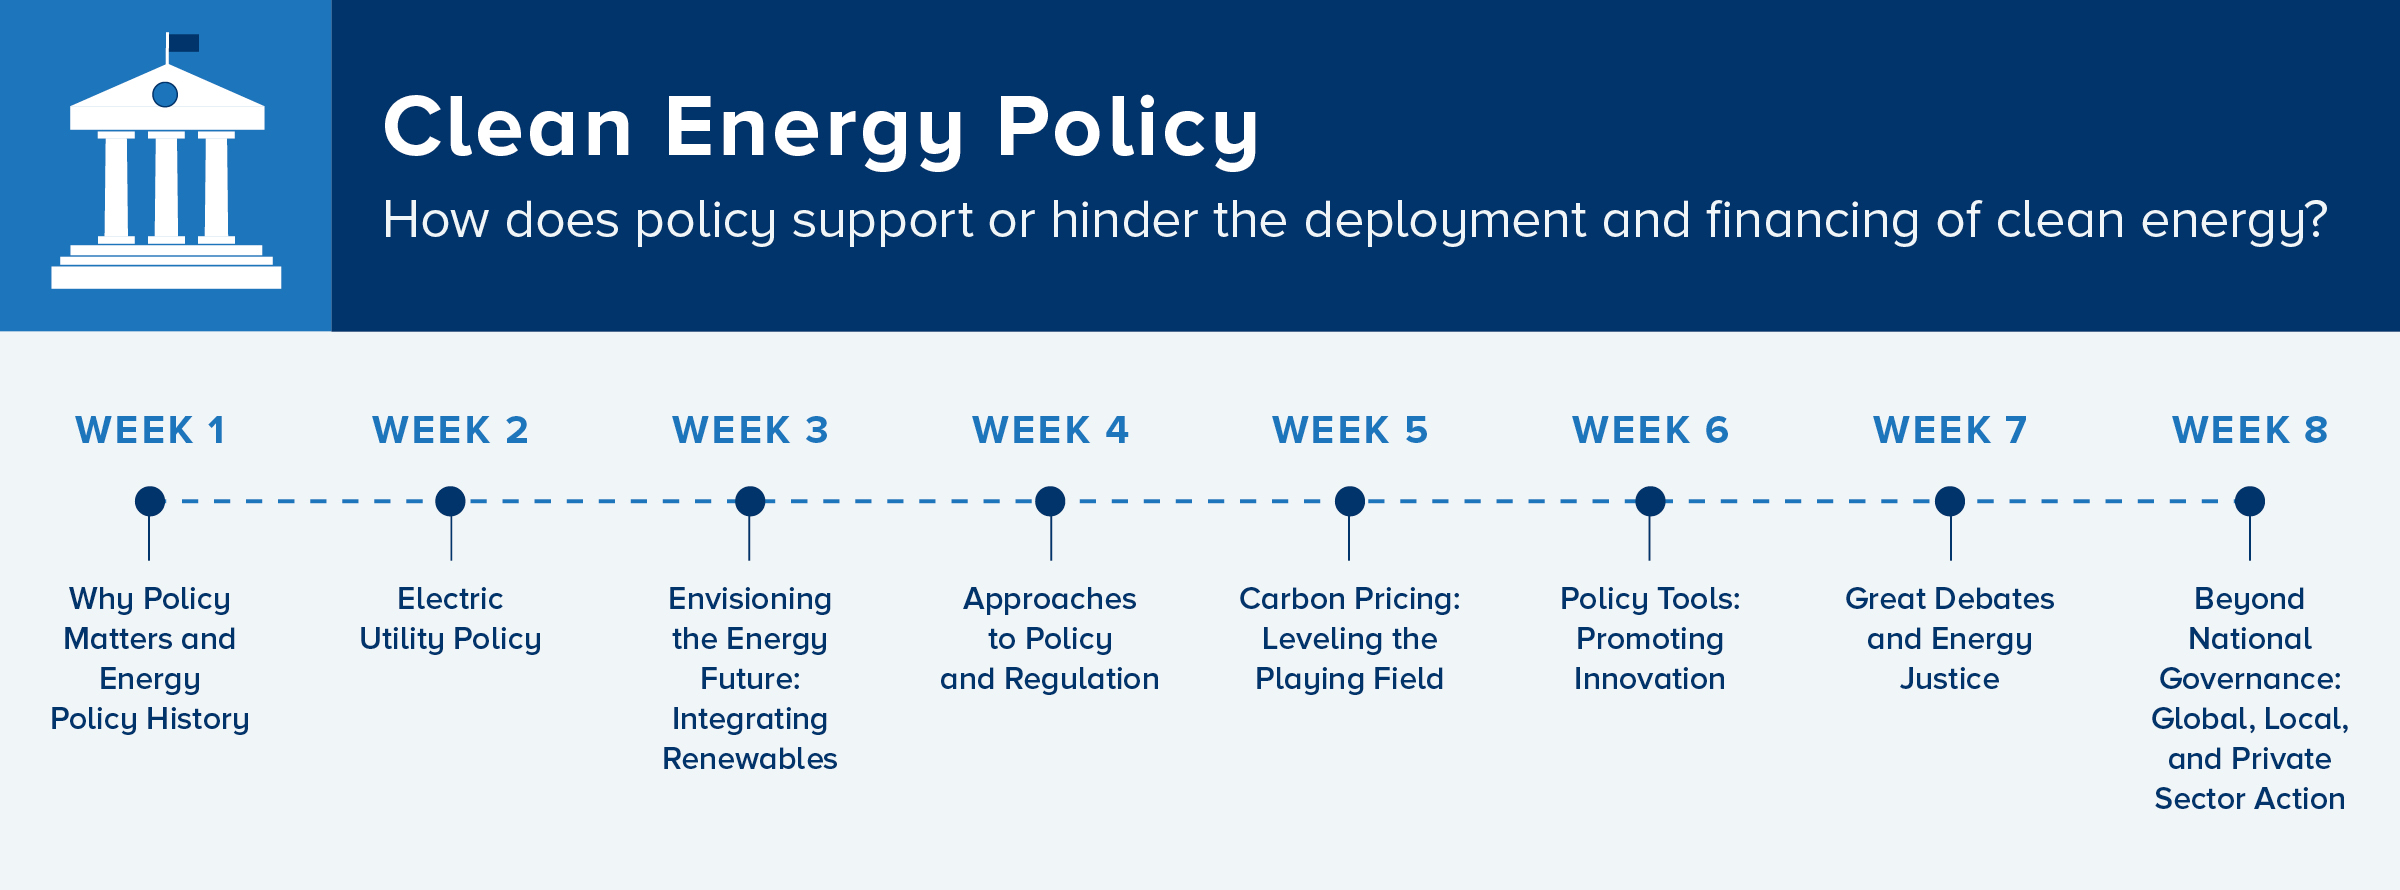 Clean Energy Policy Course Timeline